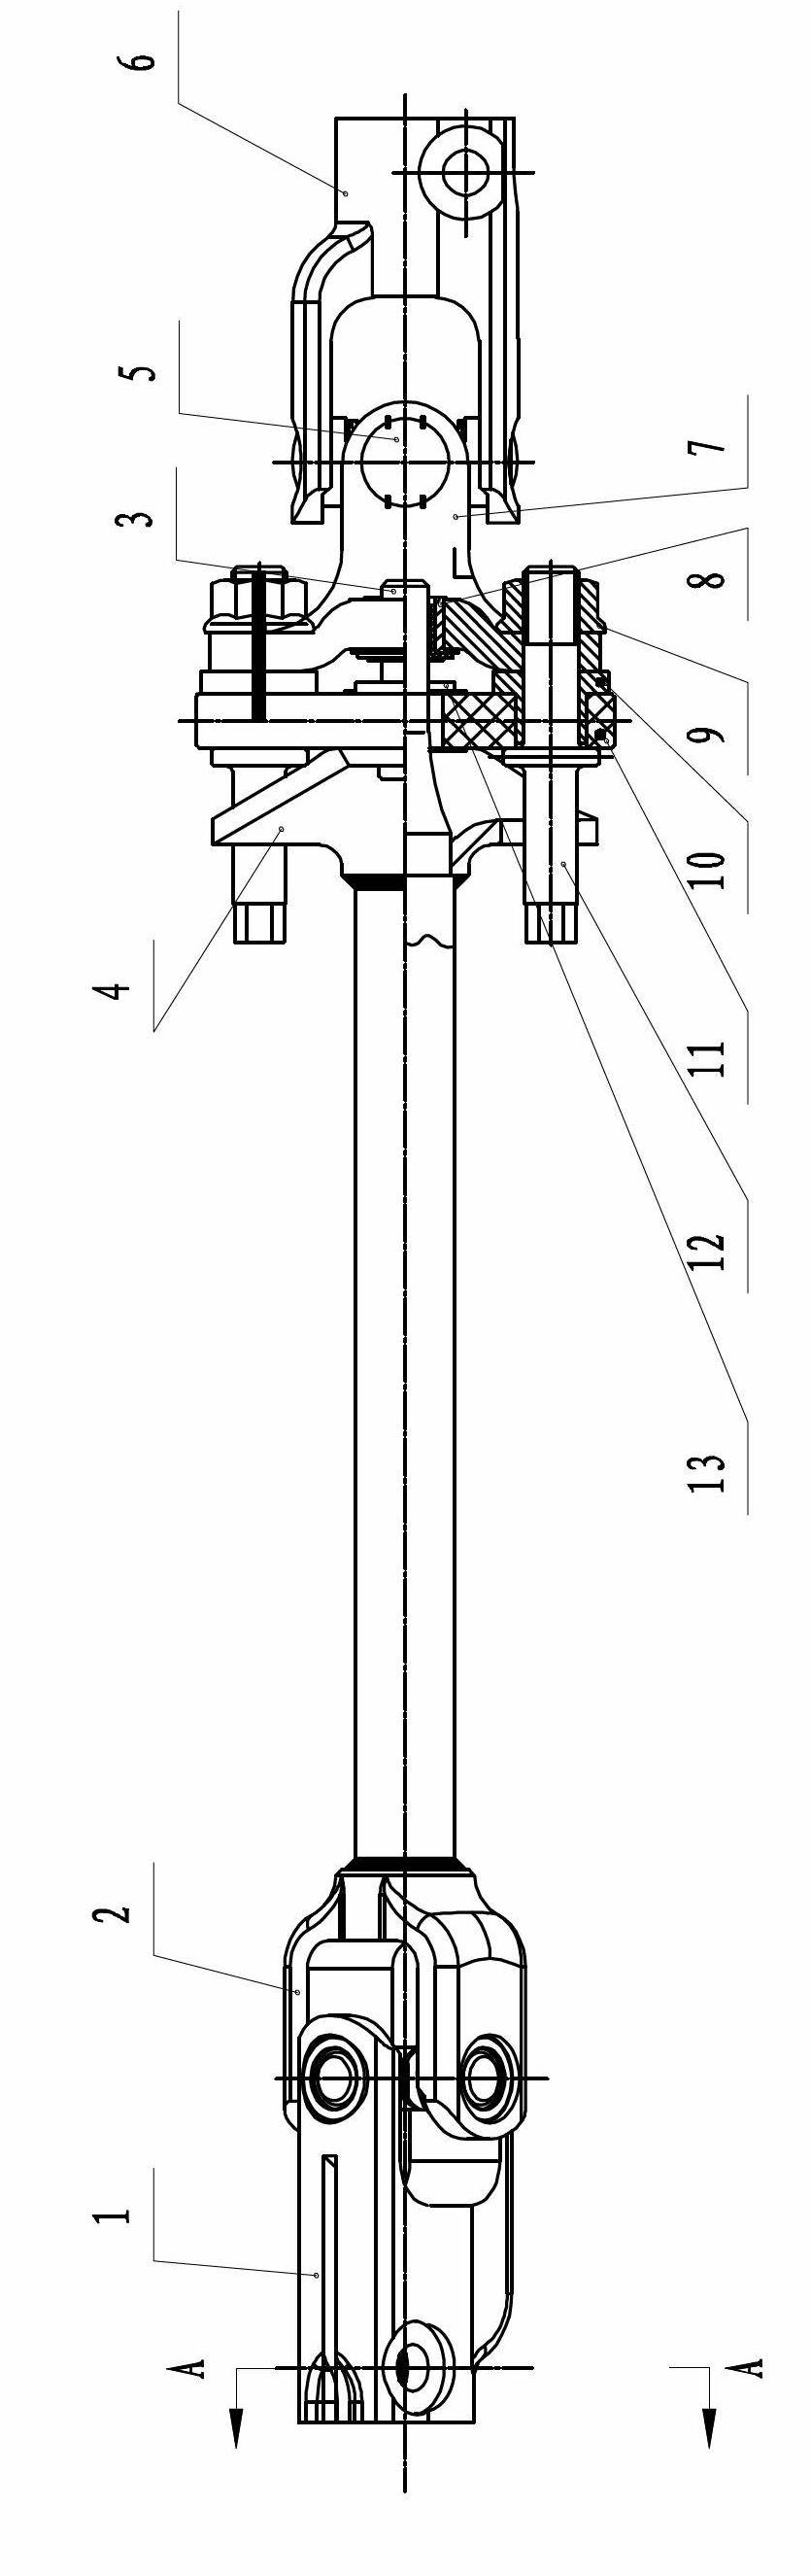 Steering under-drive shaft assembly